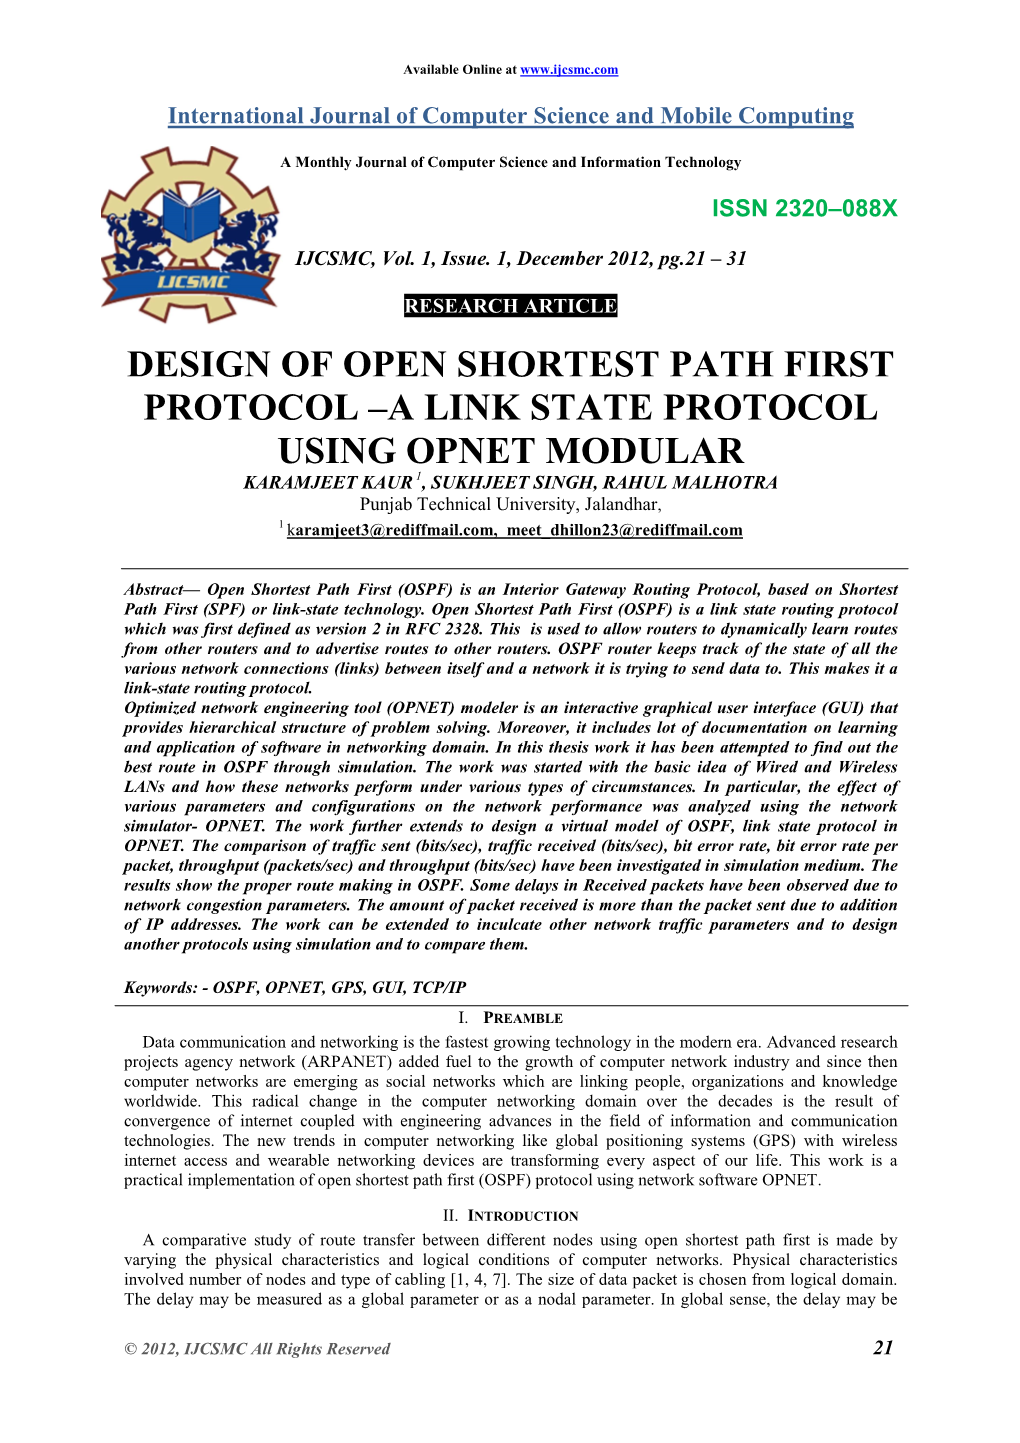 Design of Open Shortest Path First Protocol –A Link State